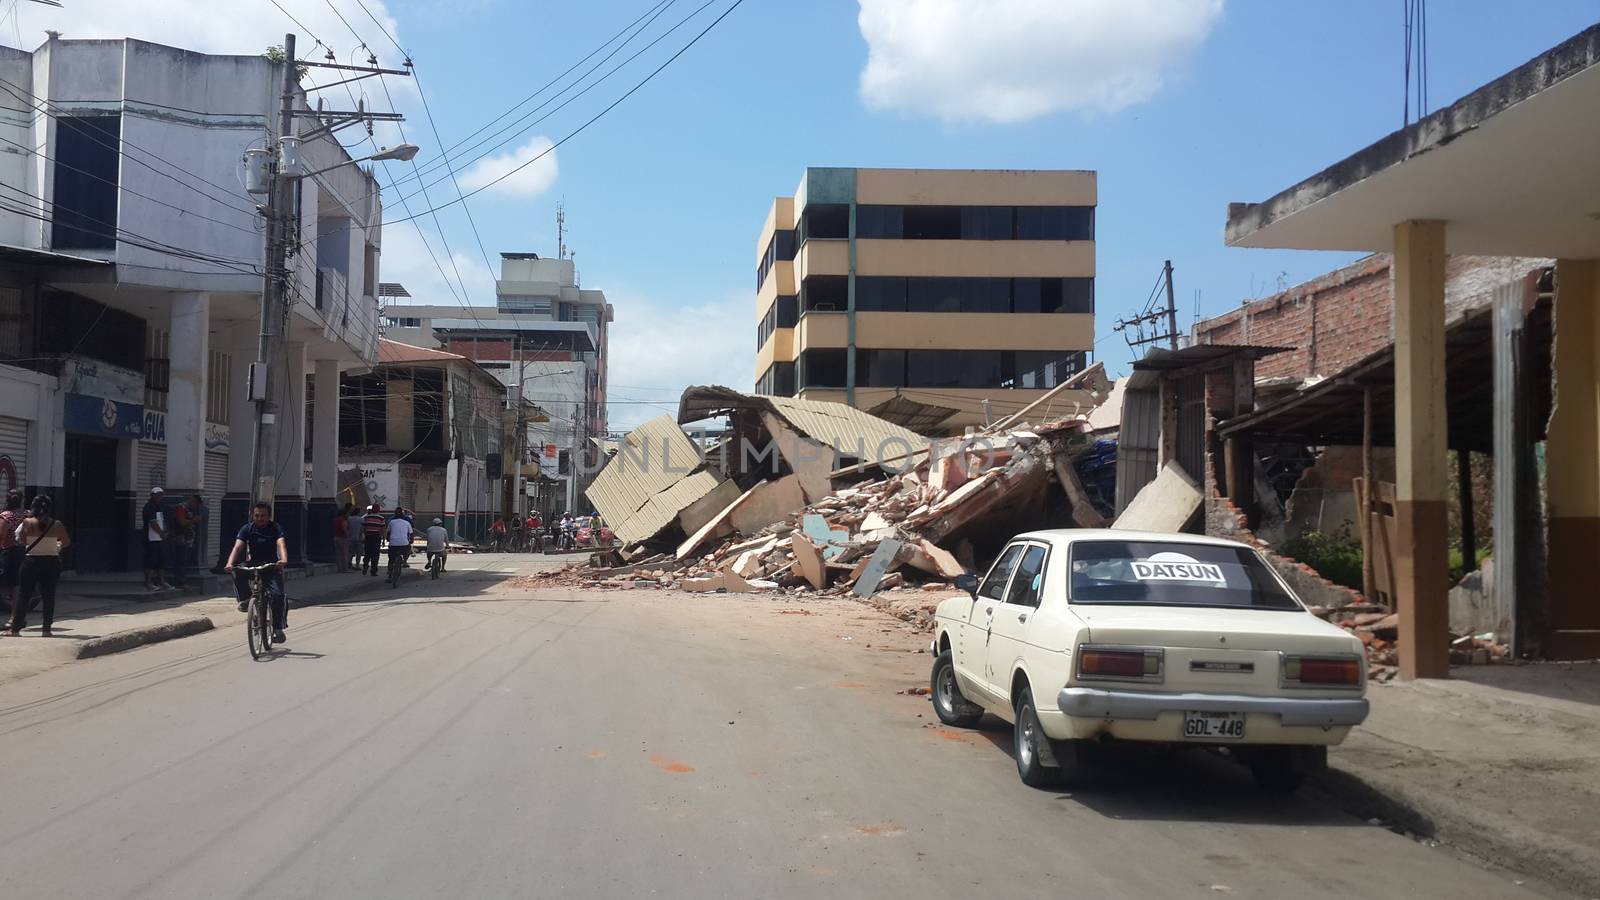 ECUADOR, Portoviejo: A building in Portoviejo, Ecuador has collapsed on April 17, 2016 the day after a devastating earthquake killed roughly 350 people, and counting. In Portoviejo, a prison was reportedly destroyed, allowing 100 inmates to escape. A state of emergency has been declared, and more than 13,000 soldiers and police officers have been deployed to the worst-hit areas of the country.